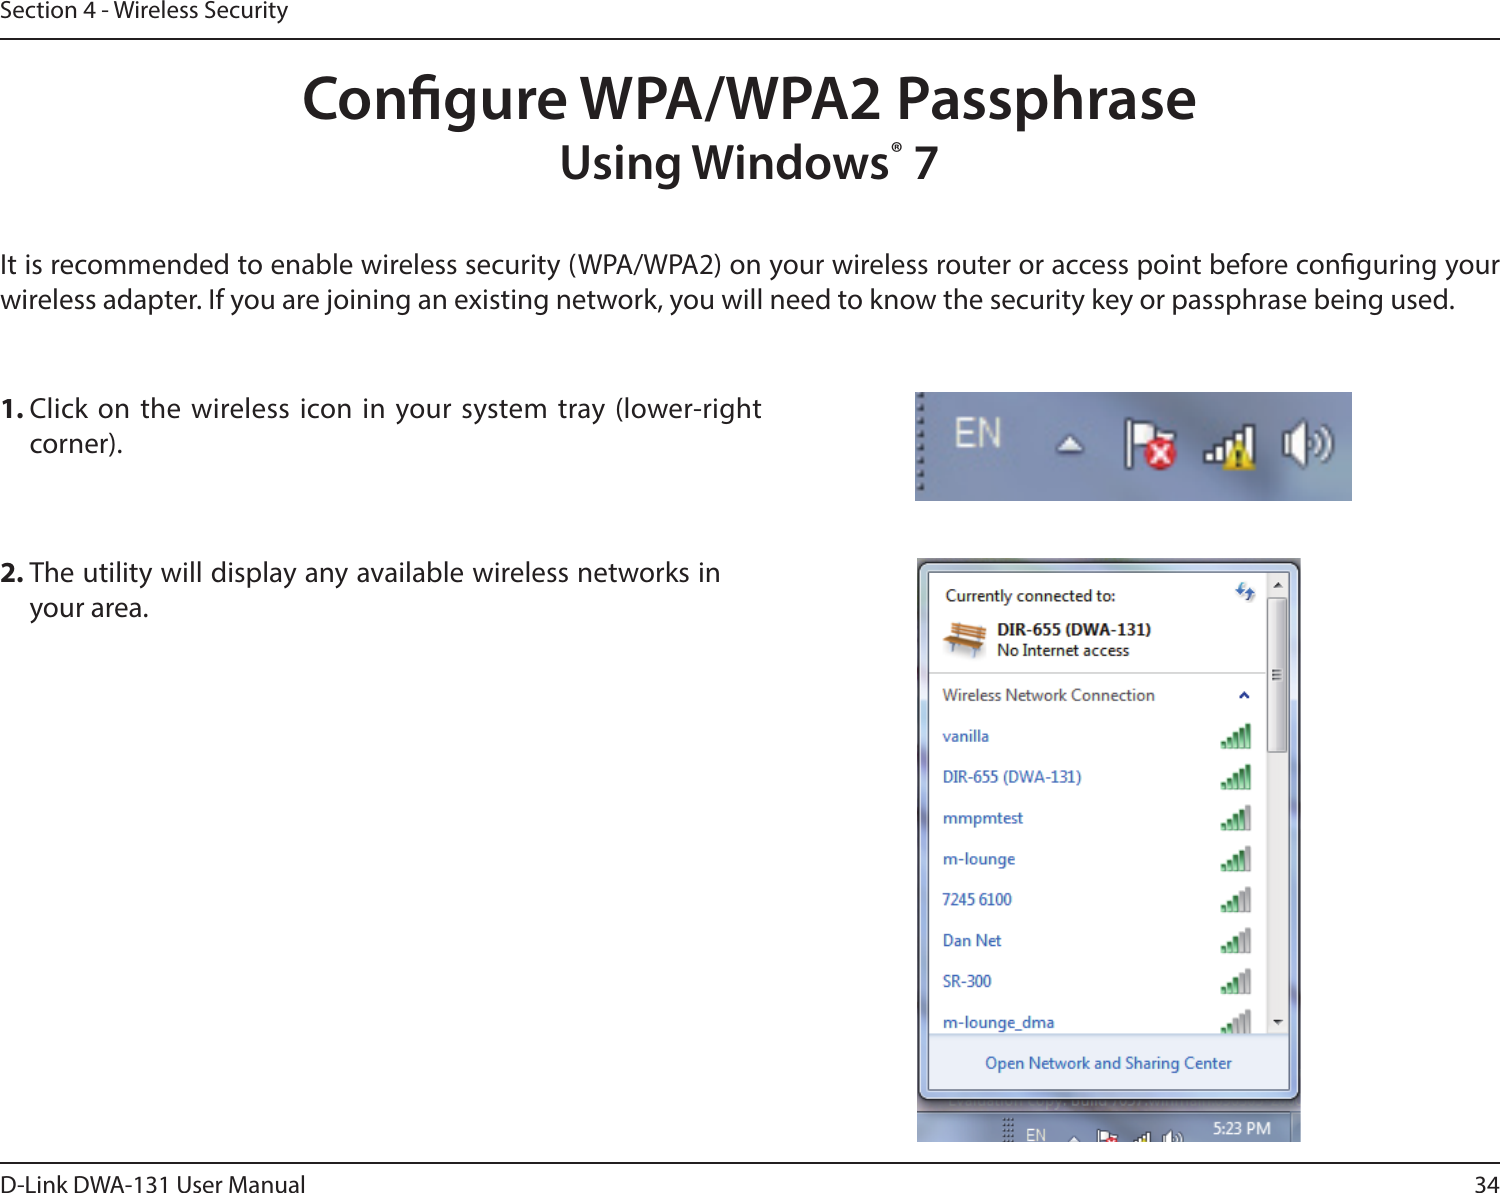 34D-Link DWA-131 User ManualSection 4 - Wireless SecurityCongure WPA/WPA2 PassphraseUsing Windows® 7It is recommended to enable wireless security (WPA/WPA2) on your wireless router or access point before conguring your wireless adapter. If you are joining an existing network, you will need to know the security key or passphrase being used.2. The utility will display any available wireless networks in your area.1. Click on the wireless icon in your system tray (lower-right corner).